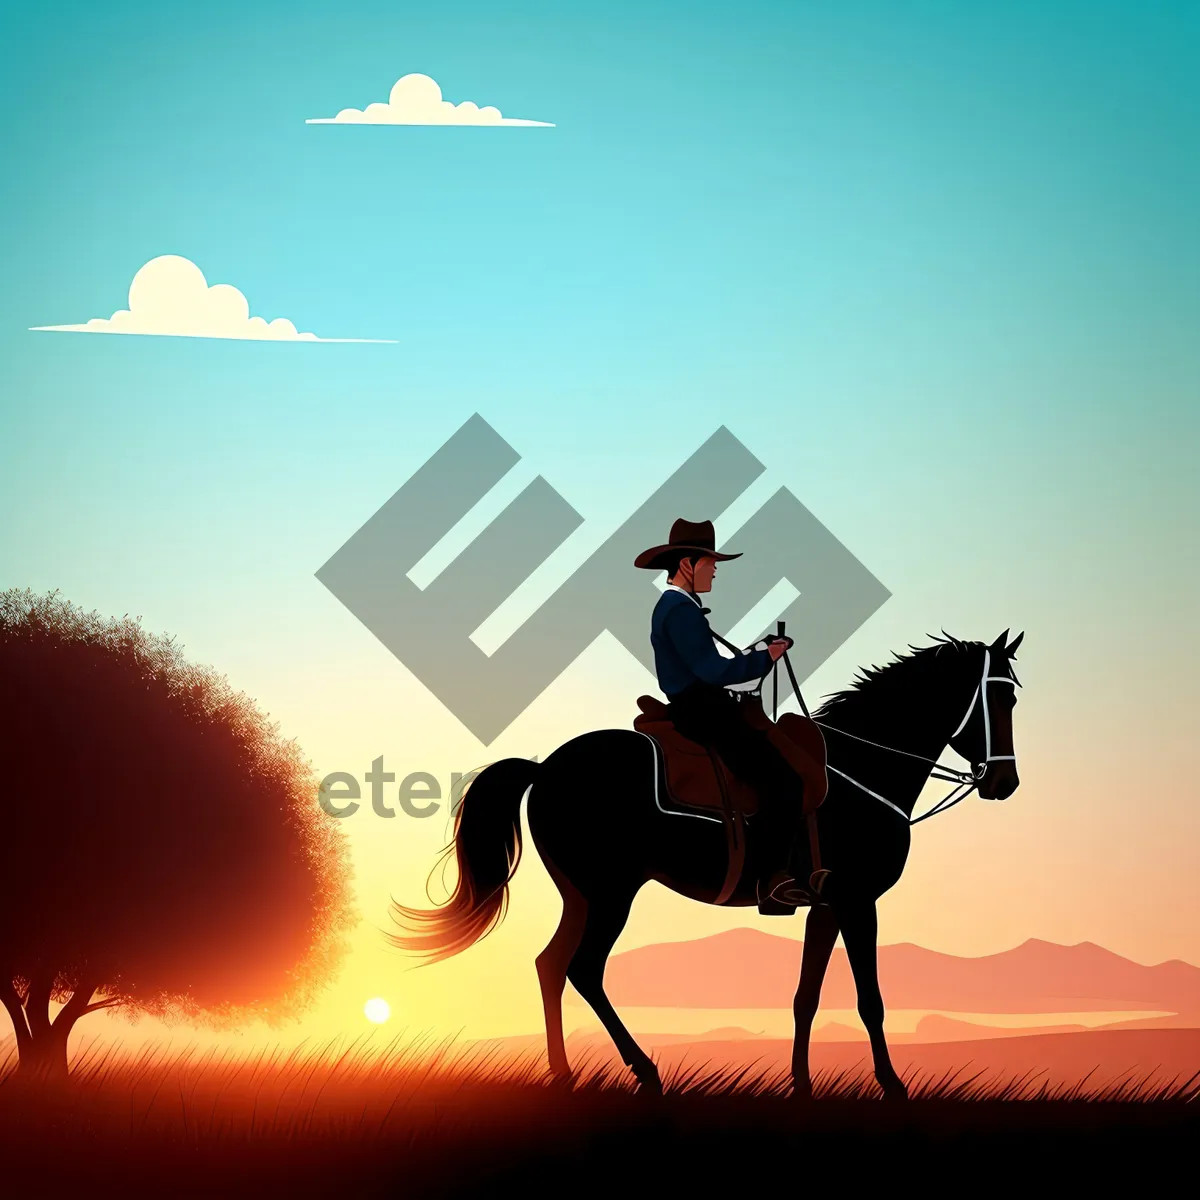 Picture of Serenity at Sunset: Cowboy on Horseback in Desert